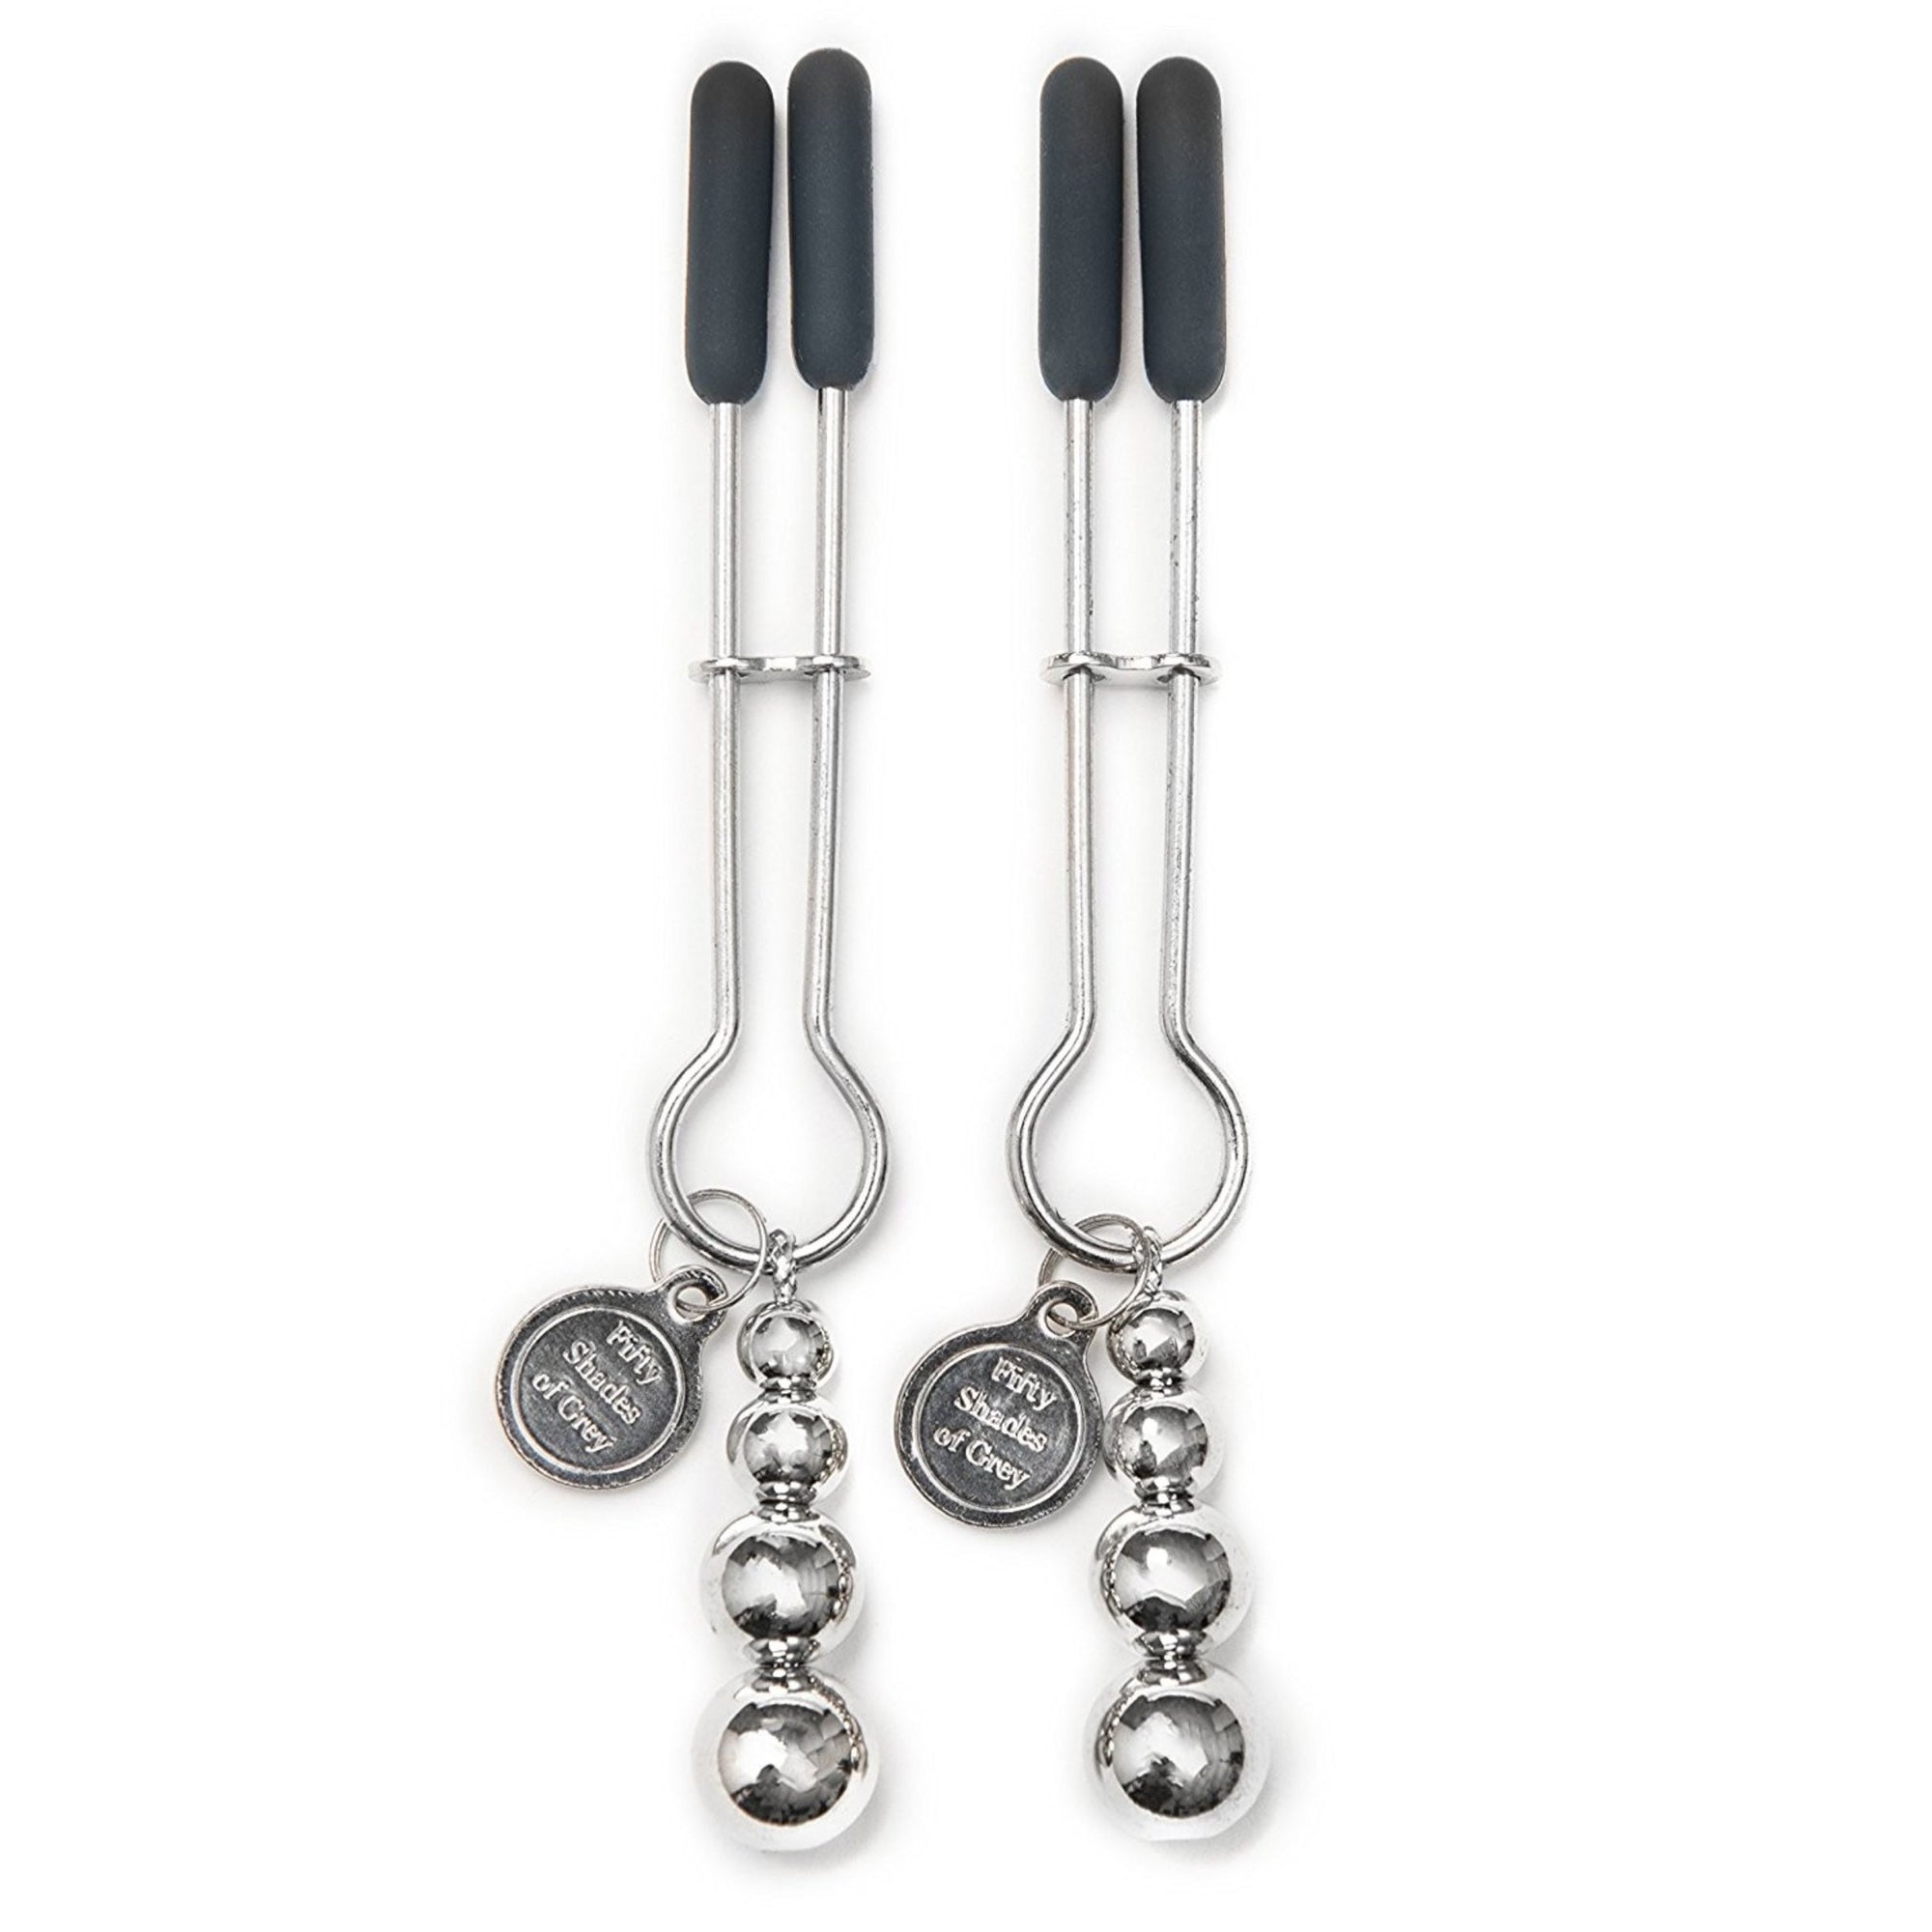 Fifty Shades Adjustable Nipple Clamps The Pinch